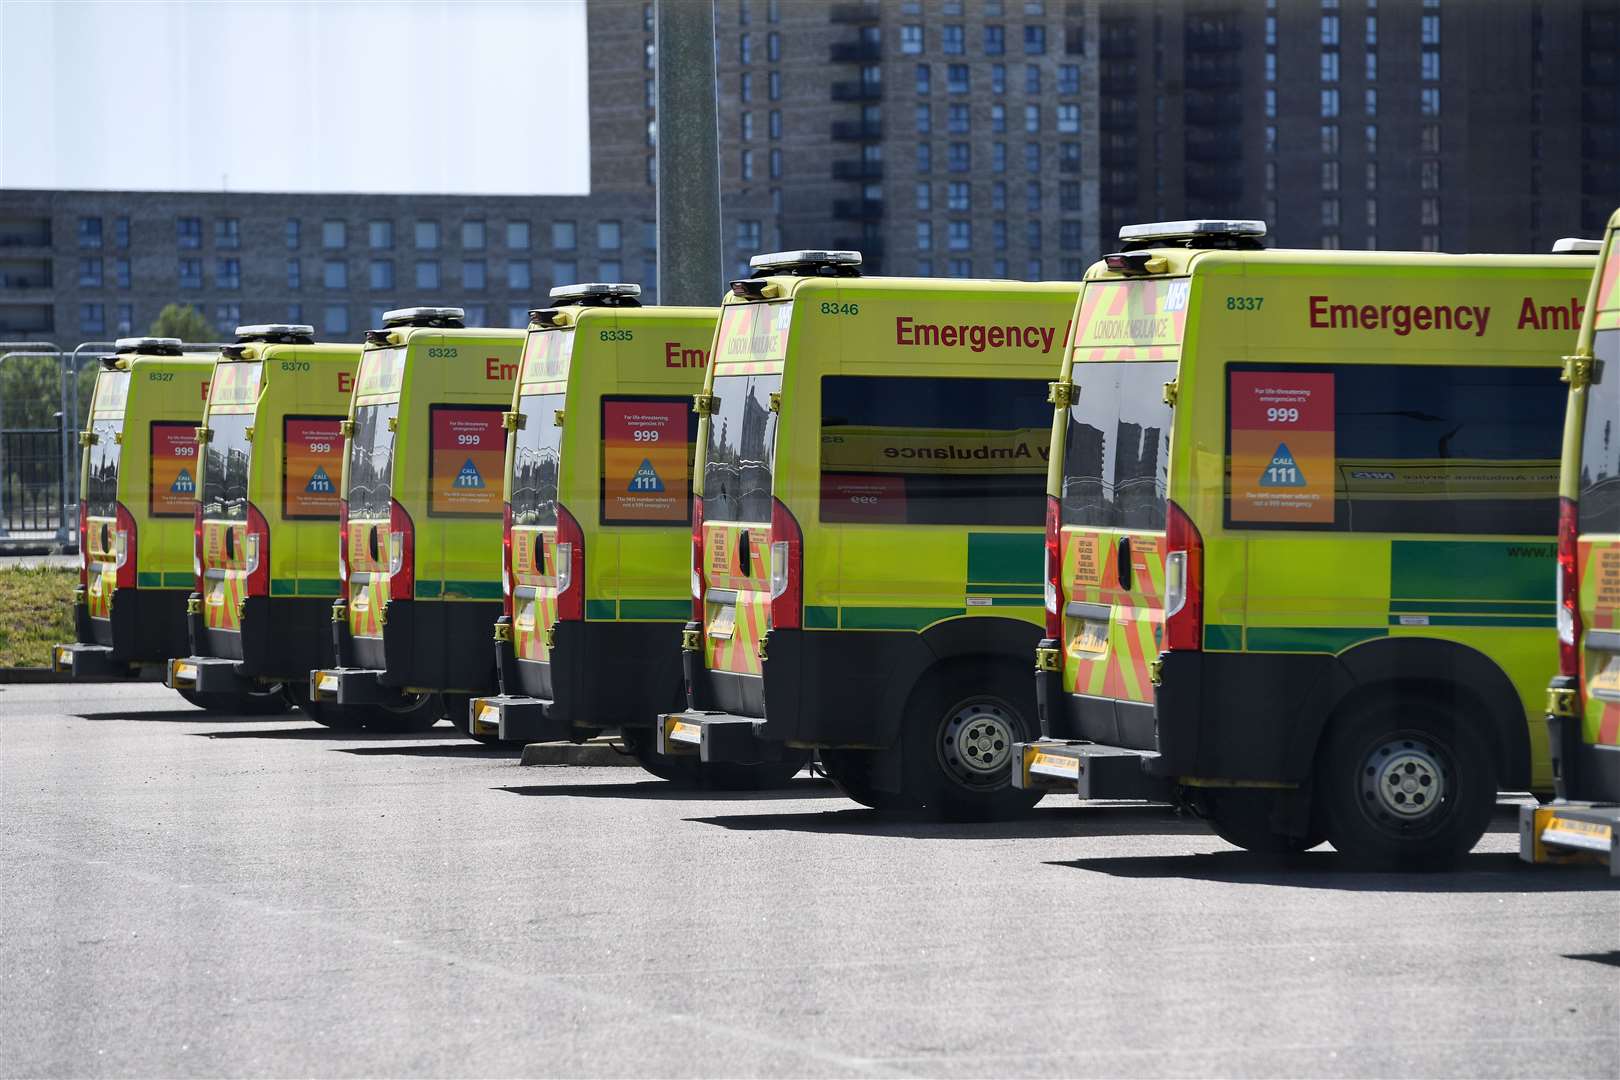 Ambulances parked at the NHS Nightingale Hospital at the ExCeL centre in London (Kirsty O’Connor/PA)